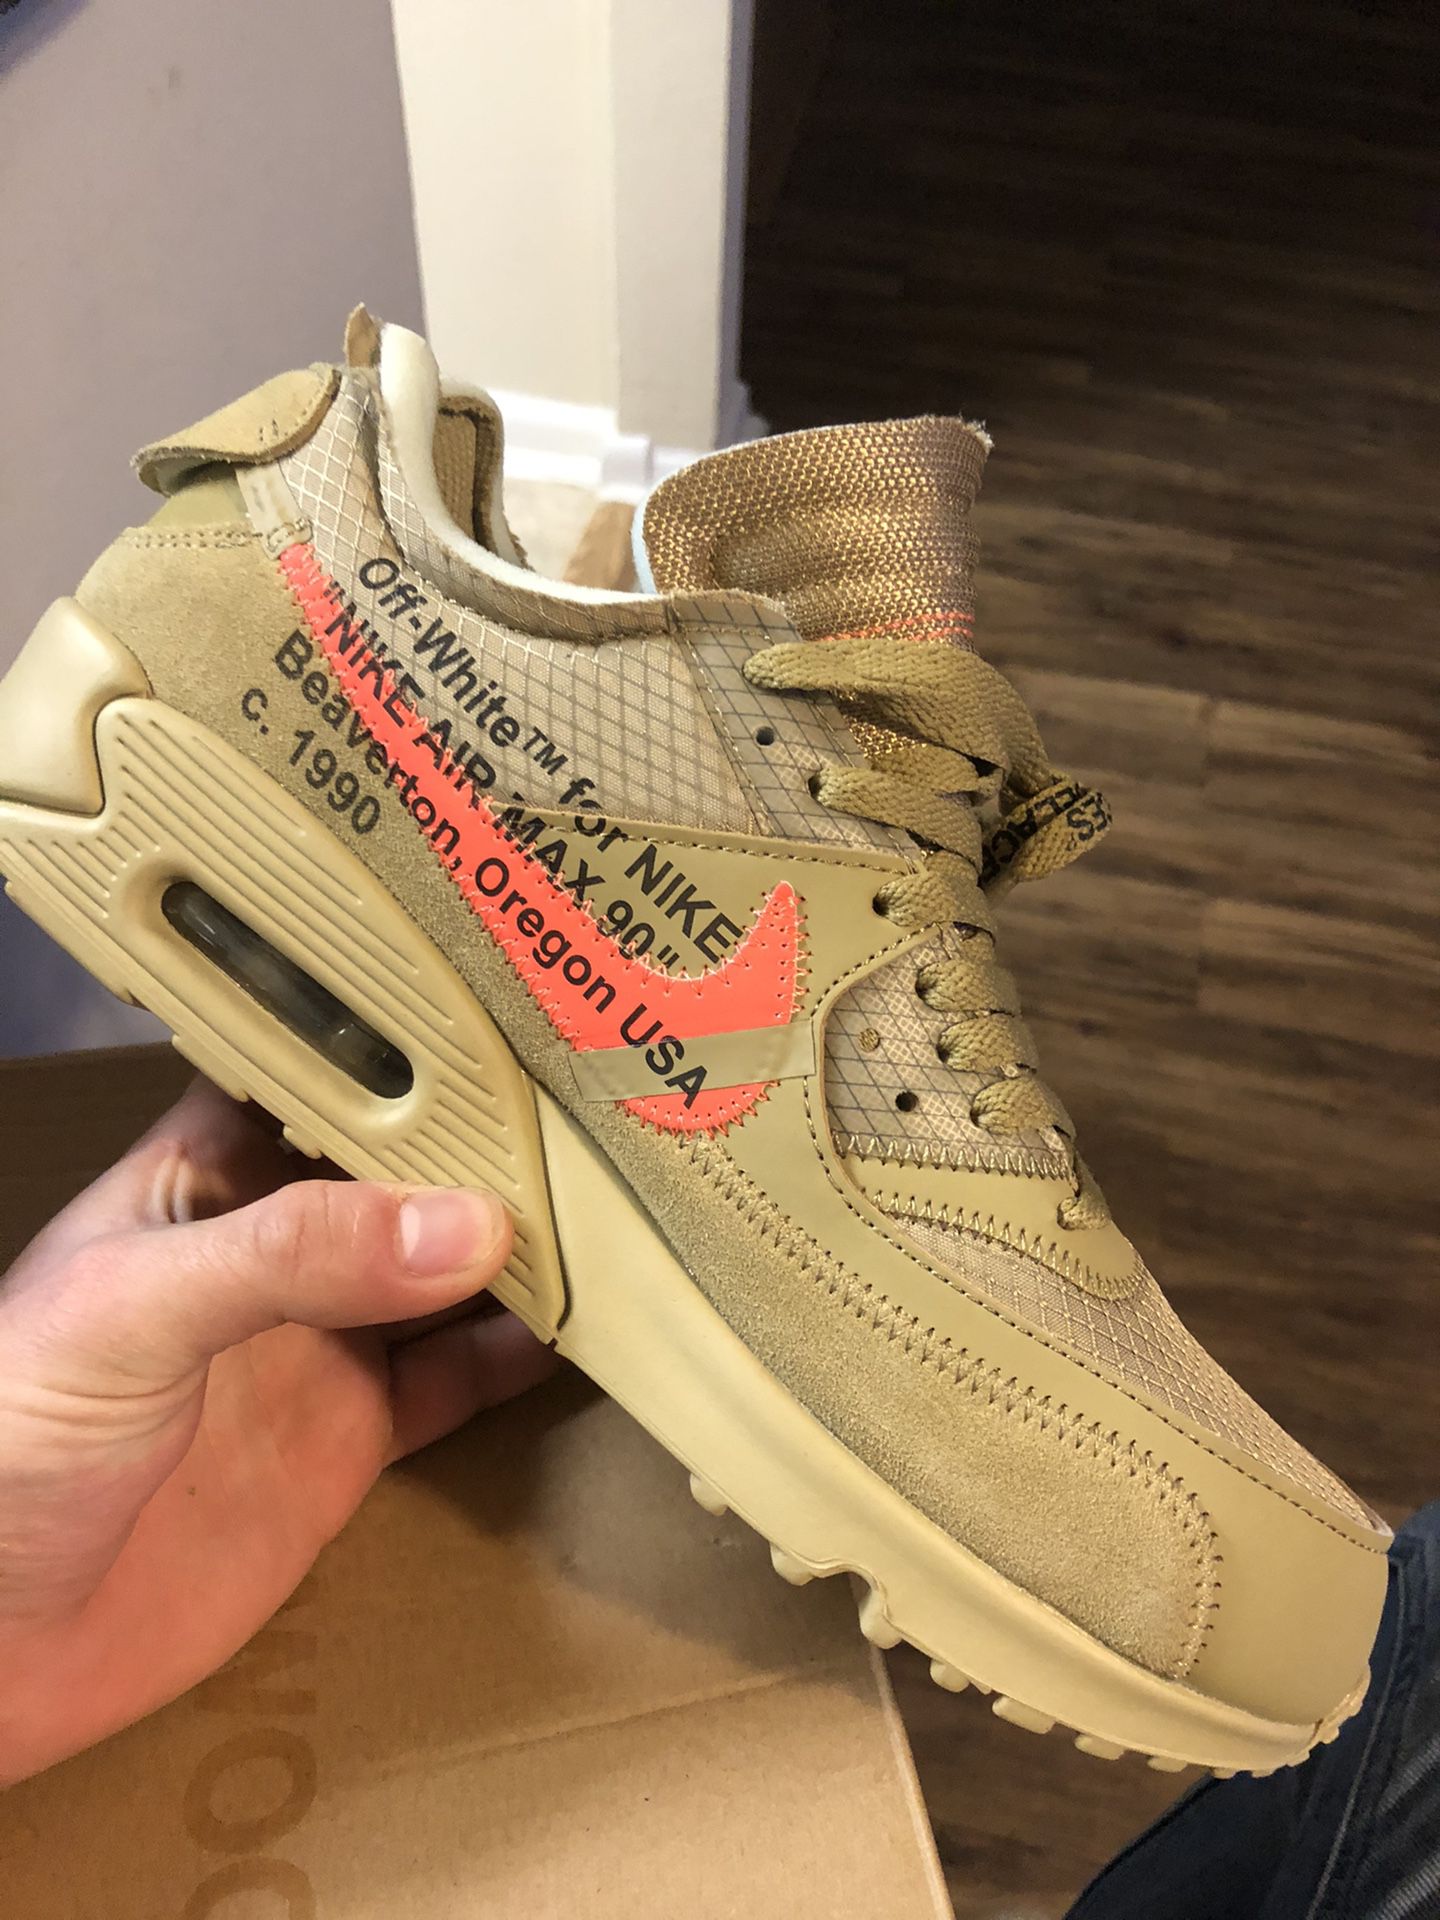 Off white air max 90 size 9.5